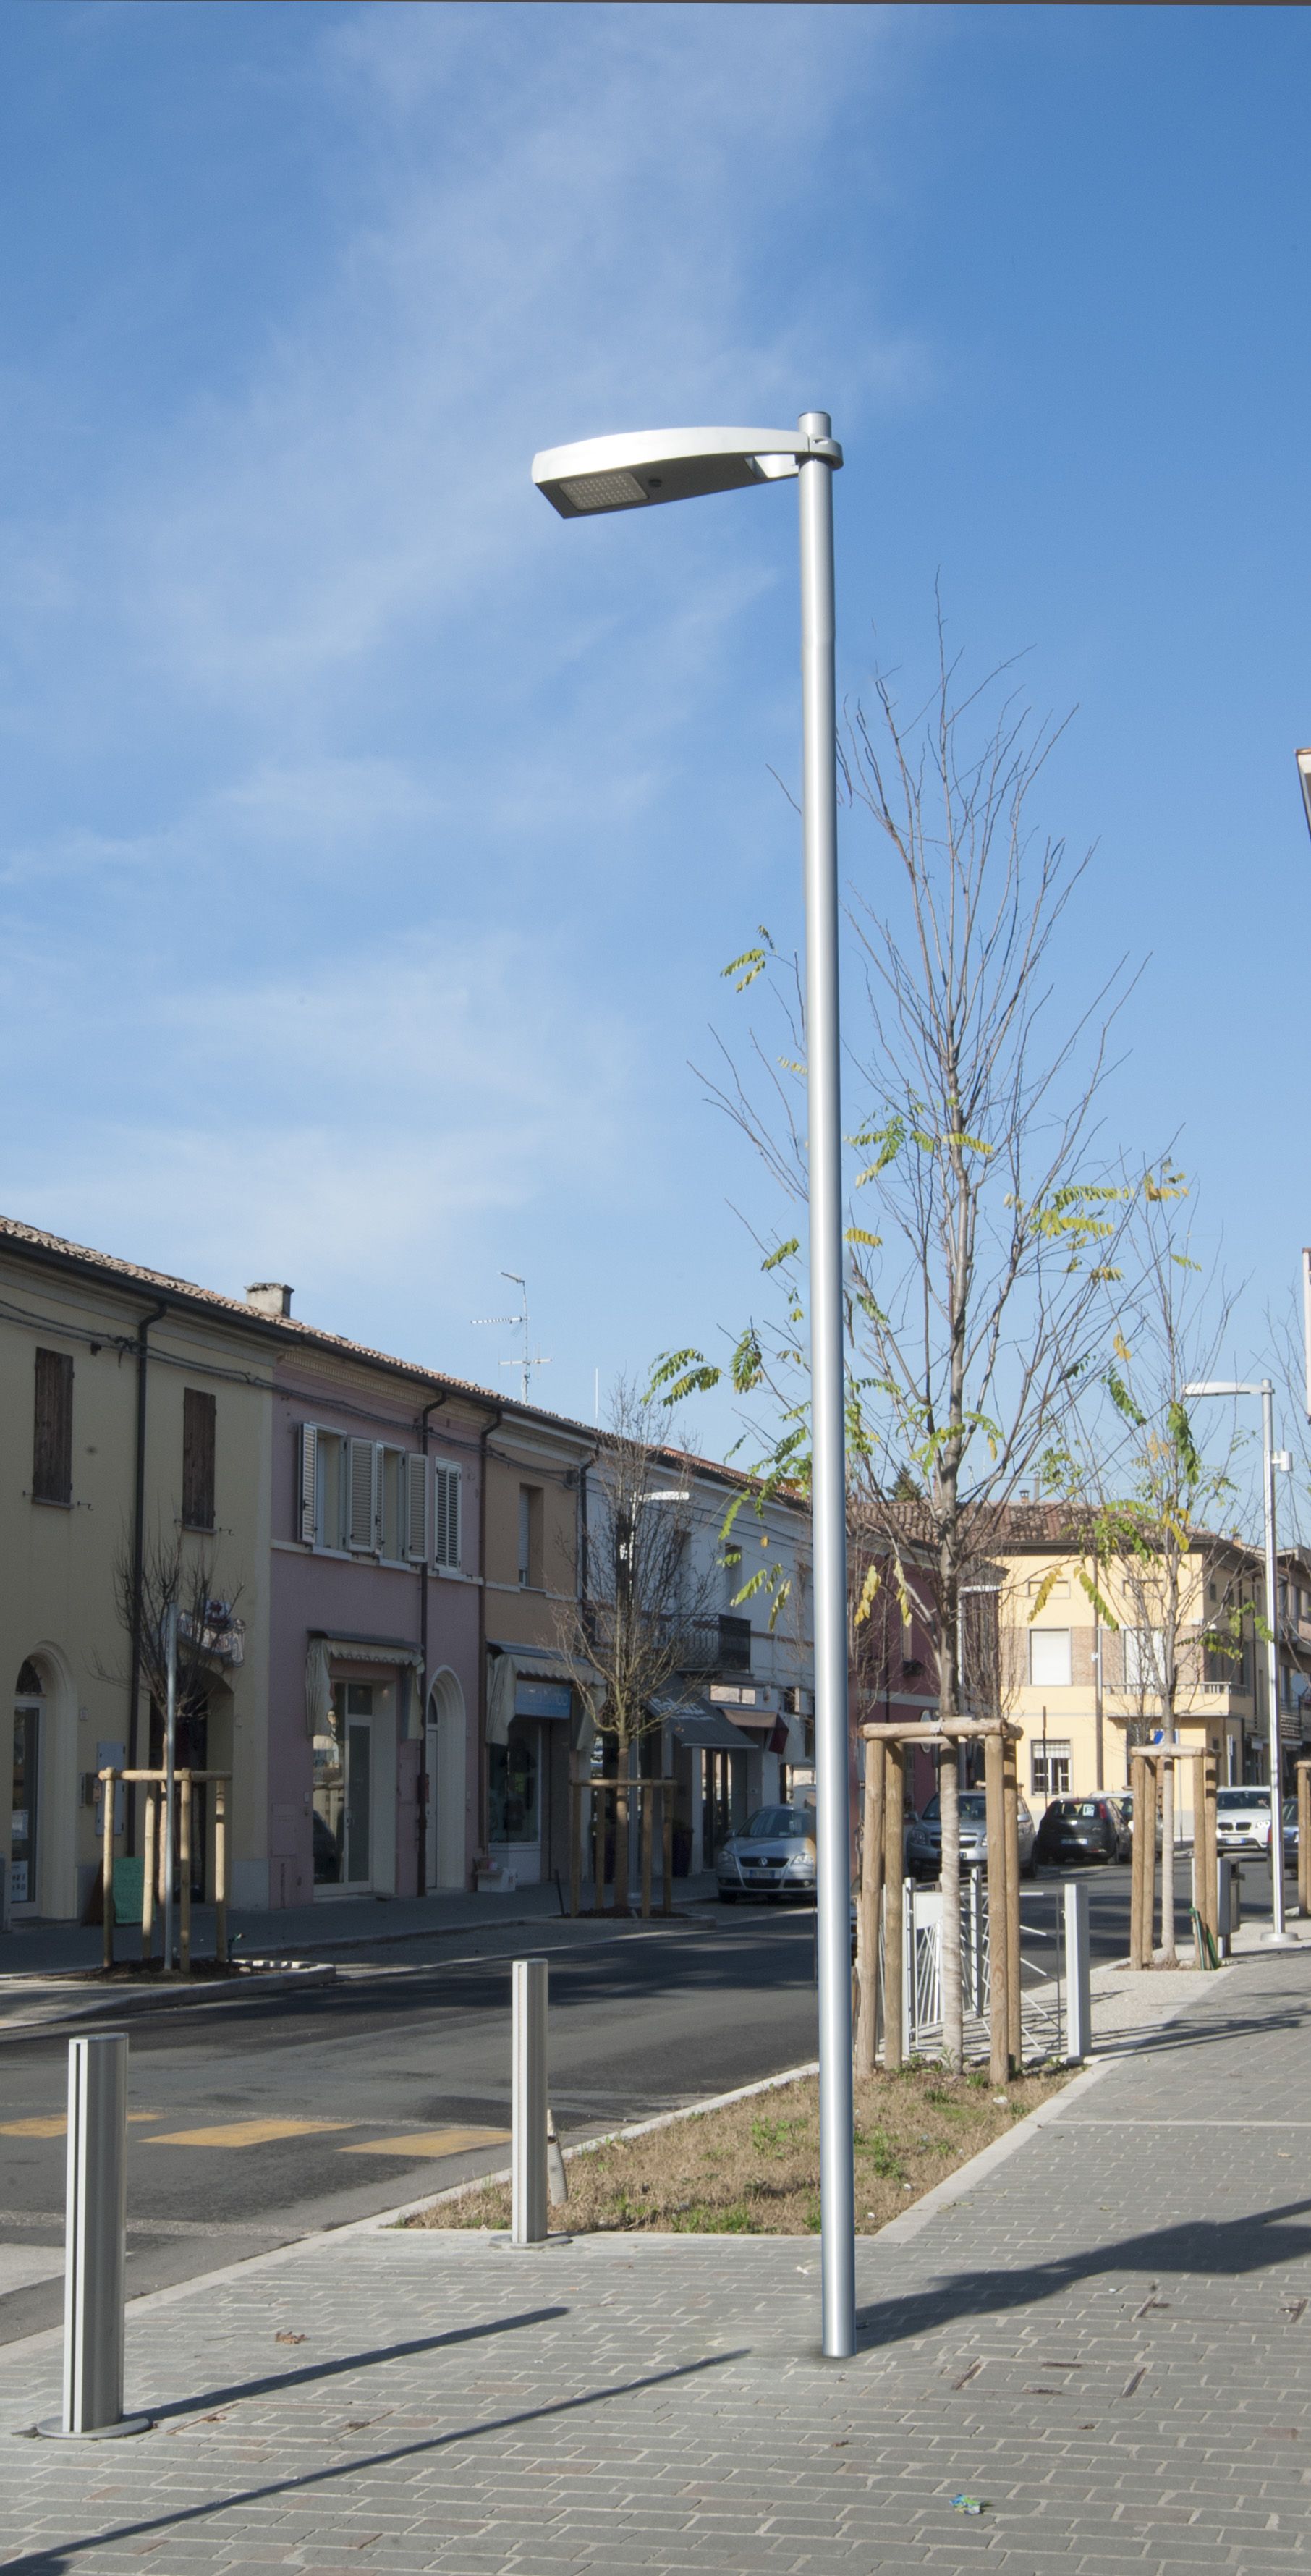 Street/urban lighting system named Electra conceived by Italian ...